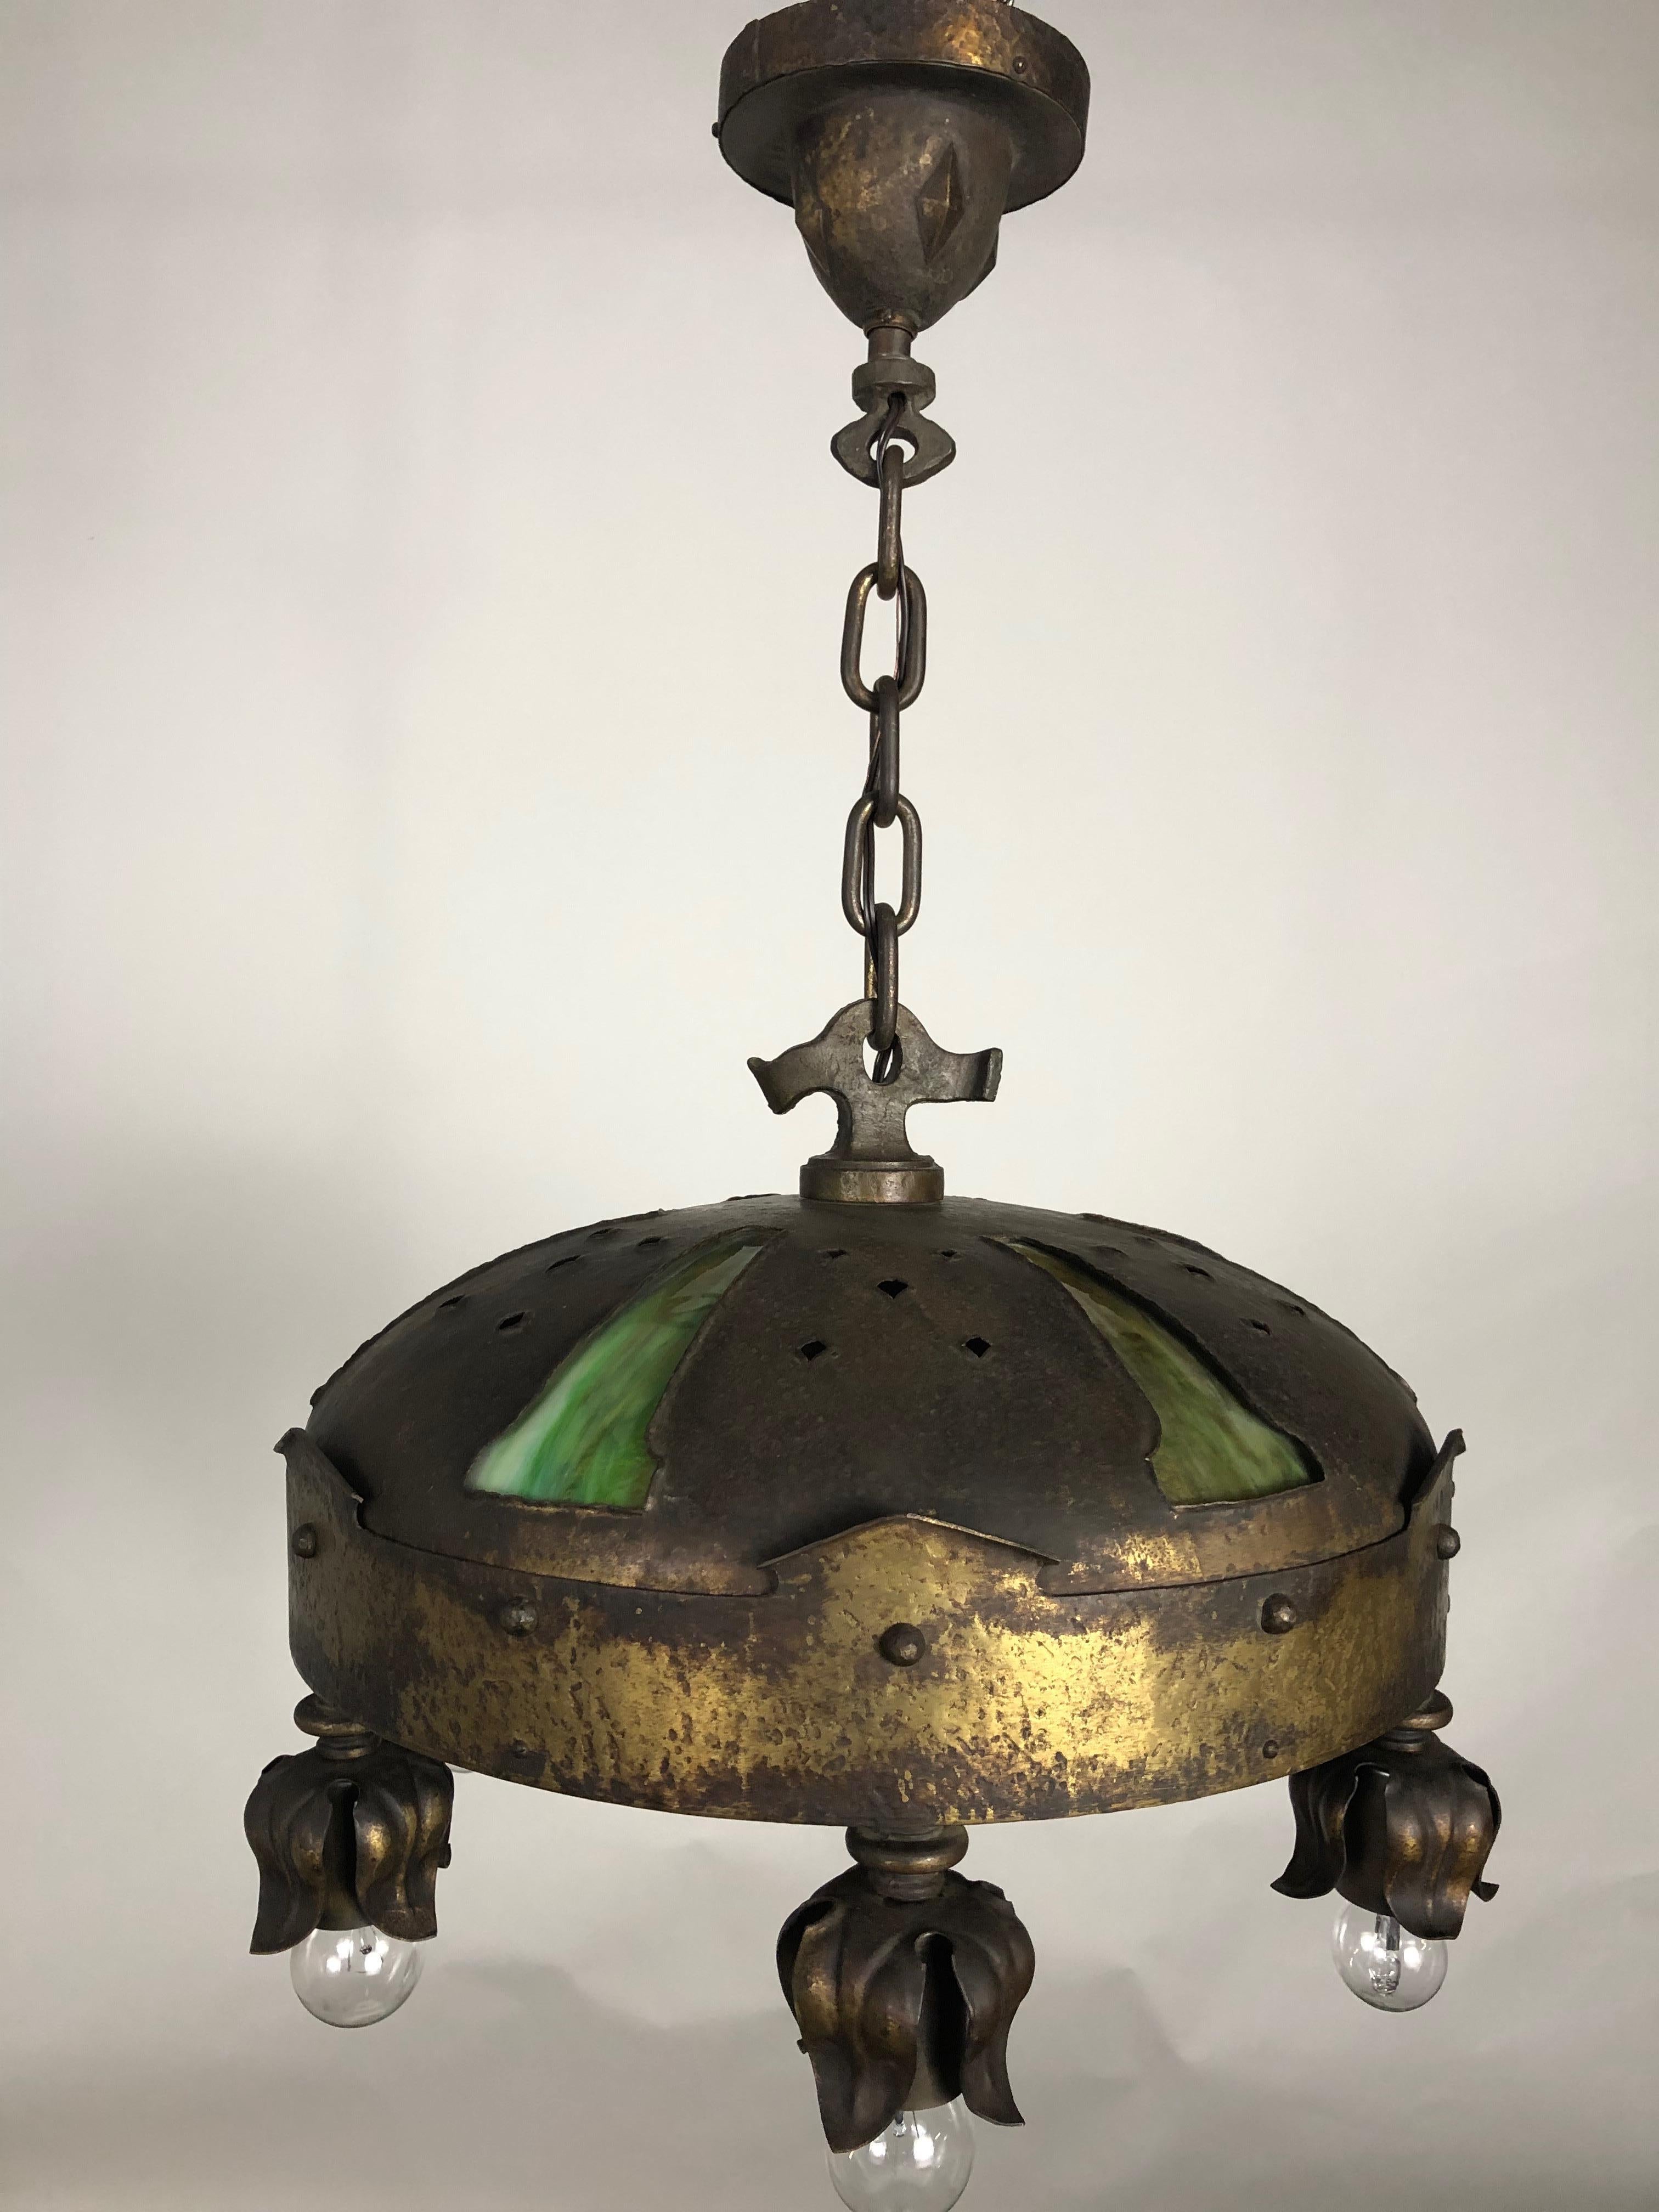 Early 1900s Gothic Revival Arts & Crafts handwrought and hammered fixture. This brass, steel and art glass pendant chandelier features over-sized rivets and six lights with foliage draped socket covers surround. A seventh-light is centered in the